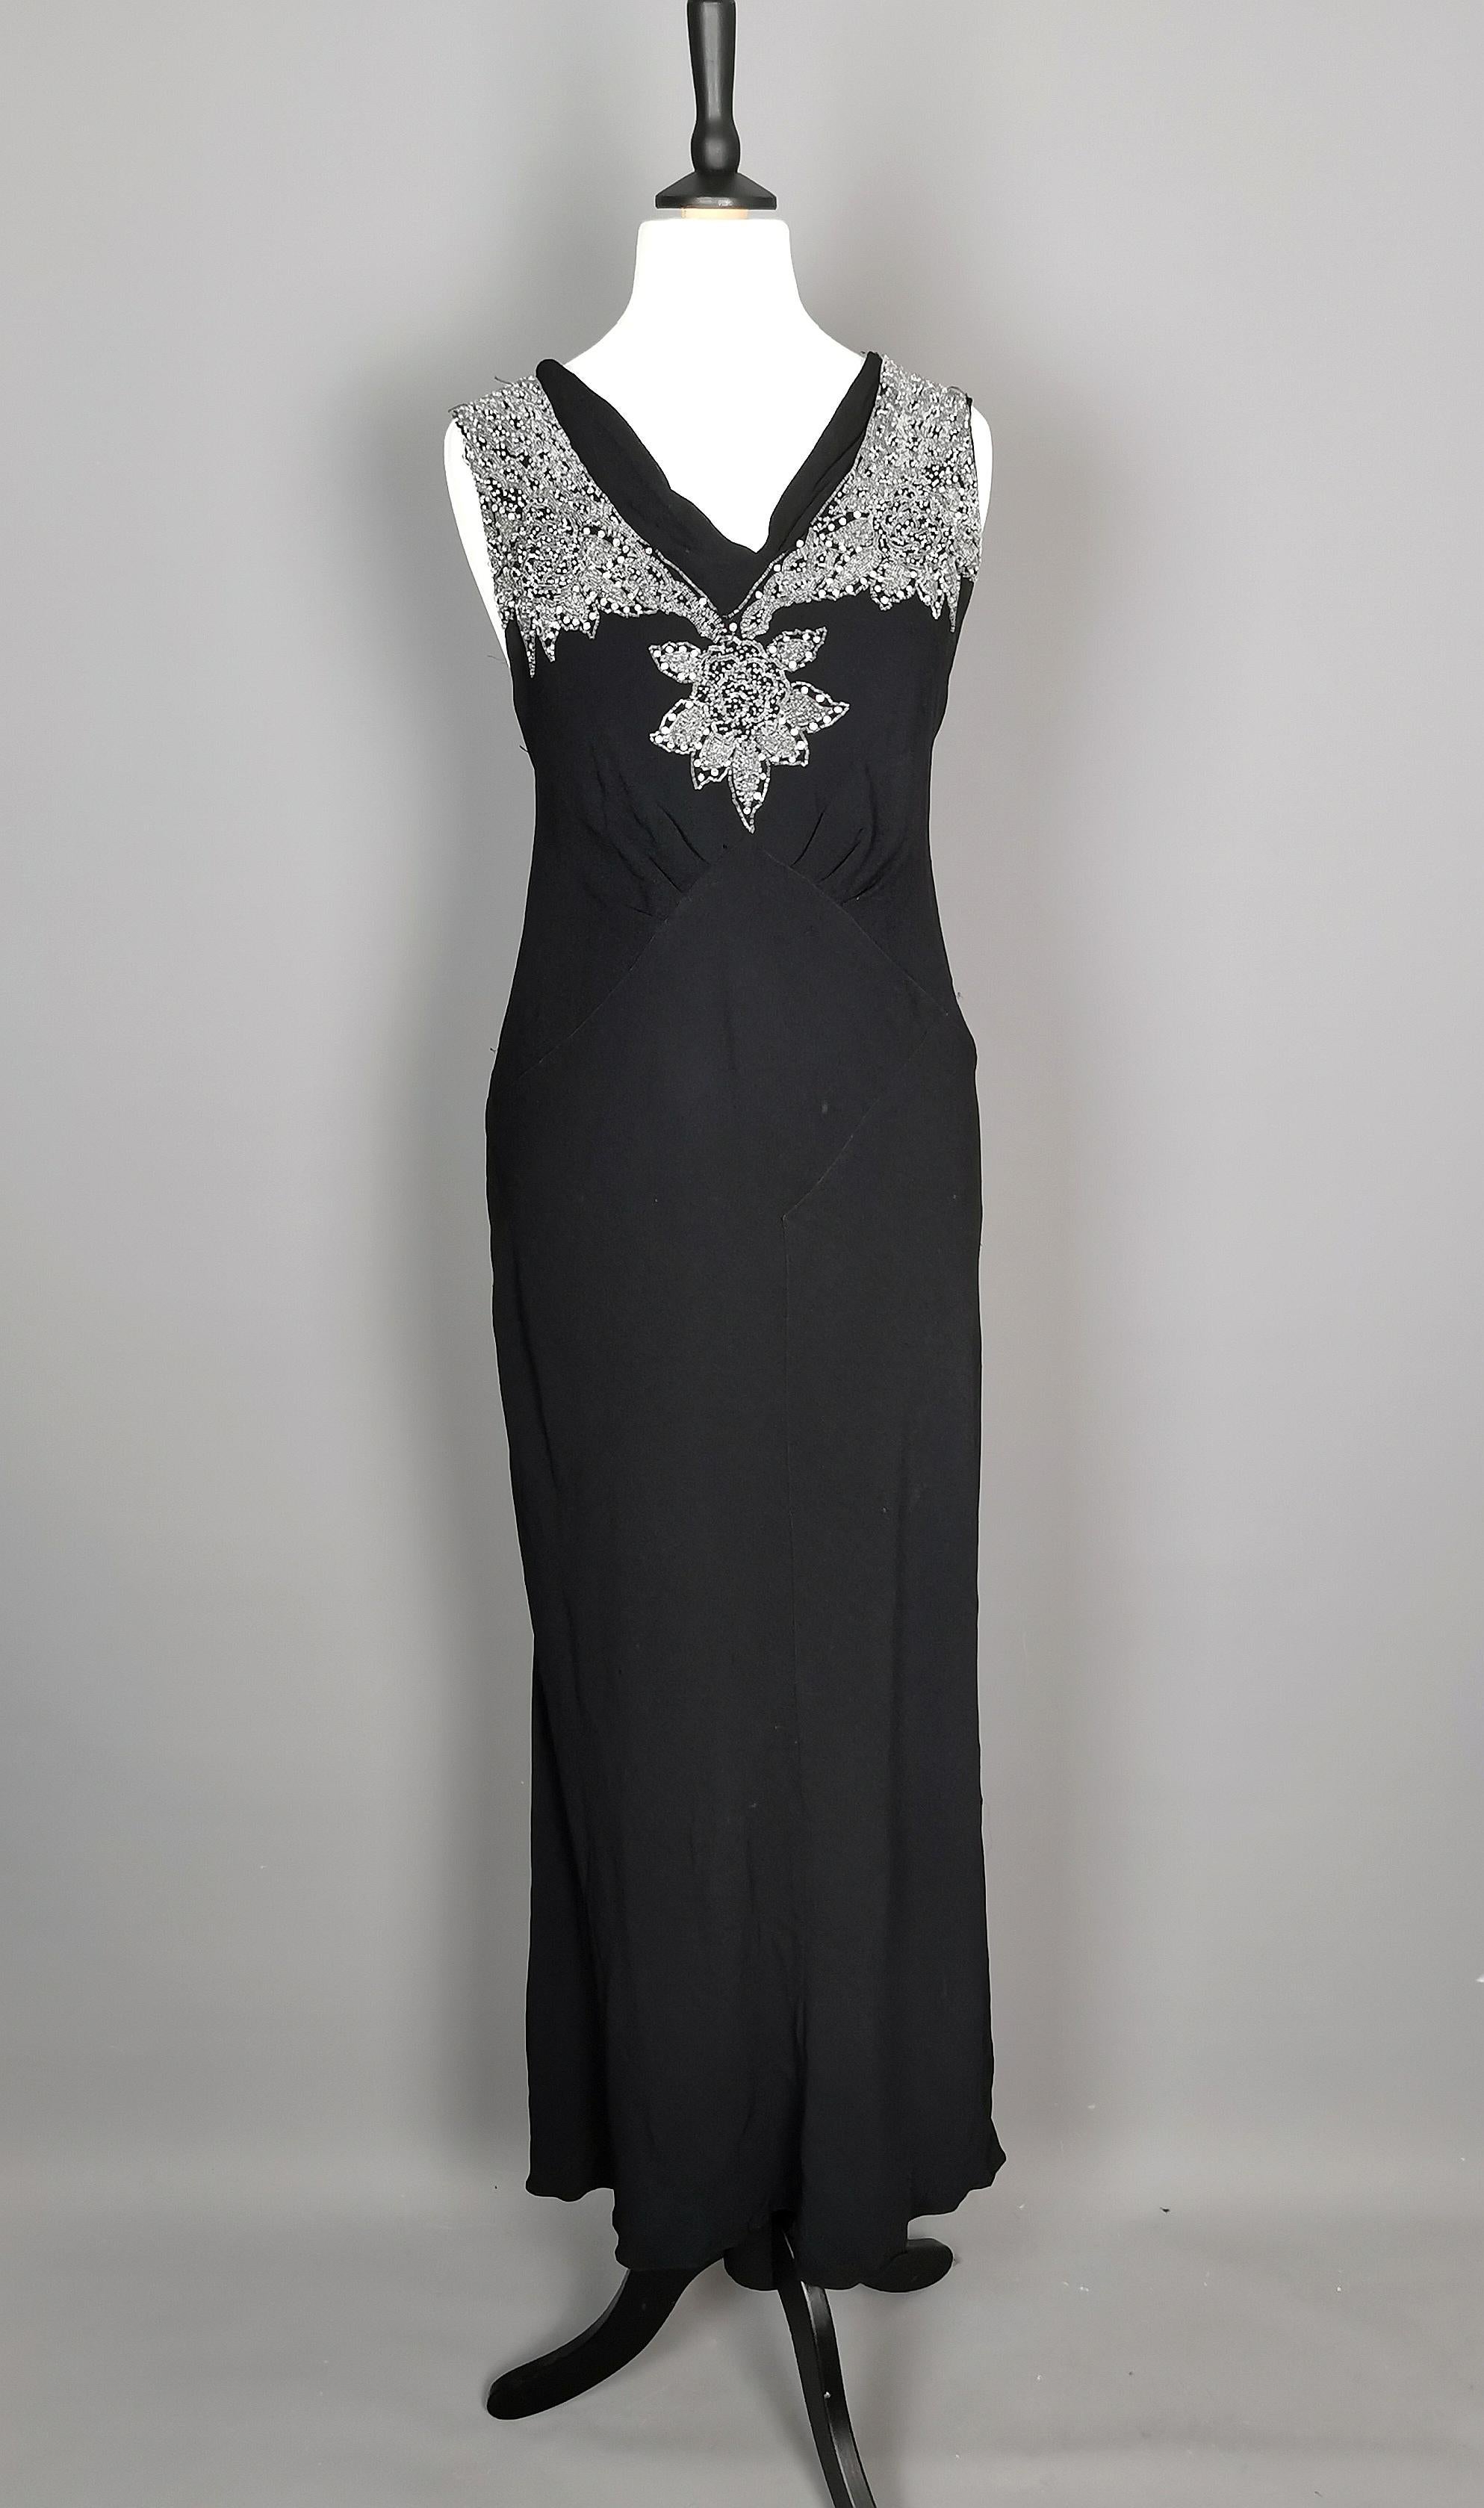 A gorgeous vintage 1930's Black beaded dress.

A slinky black crepe rayon dress with a v neck, cinched in at the waist with a beautiful bias cut and heavily beaded shoulders and mid.

It has a figure hugging silhouette with some stretch to the